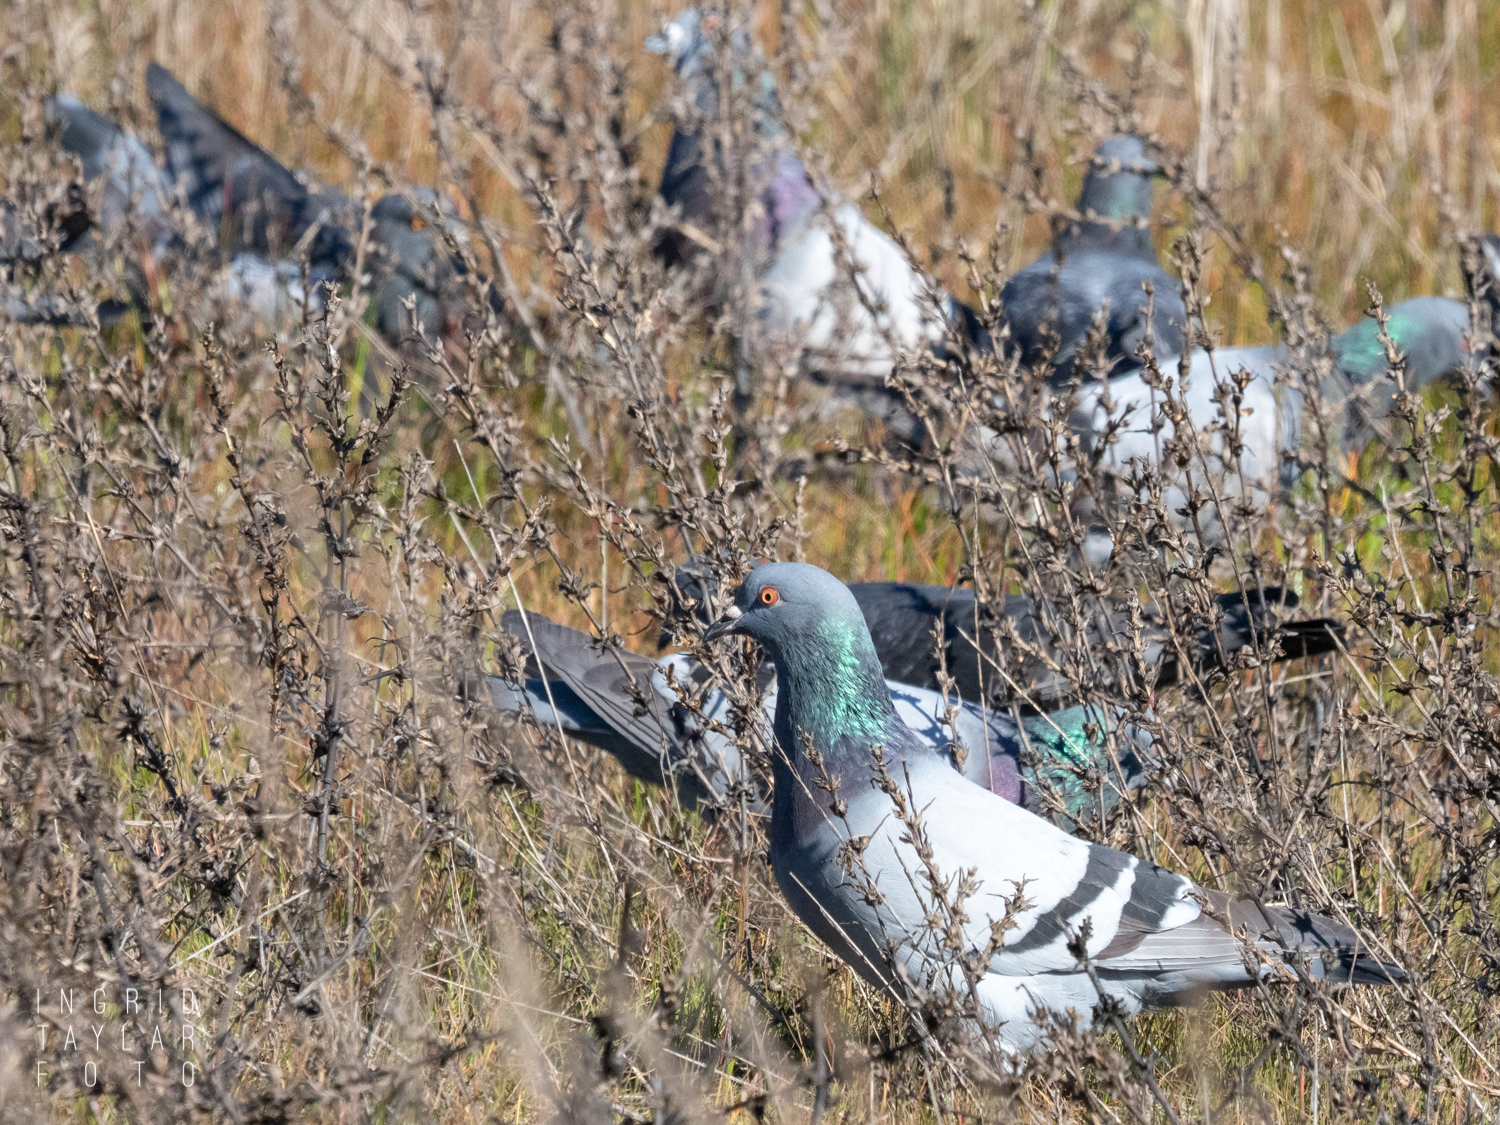 Pigeons Eating Grass Seed